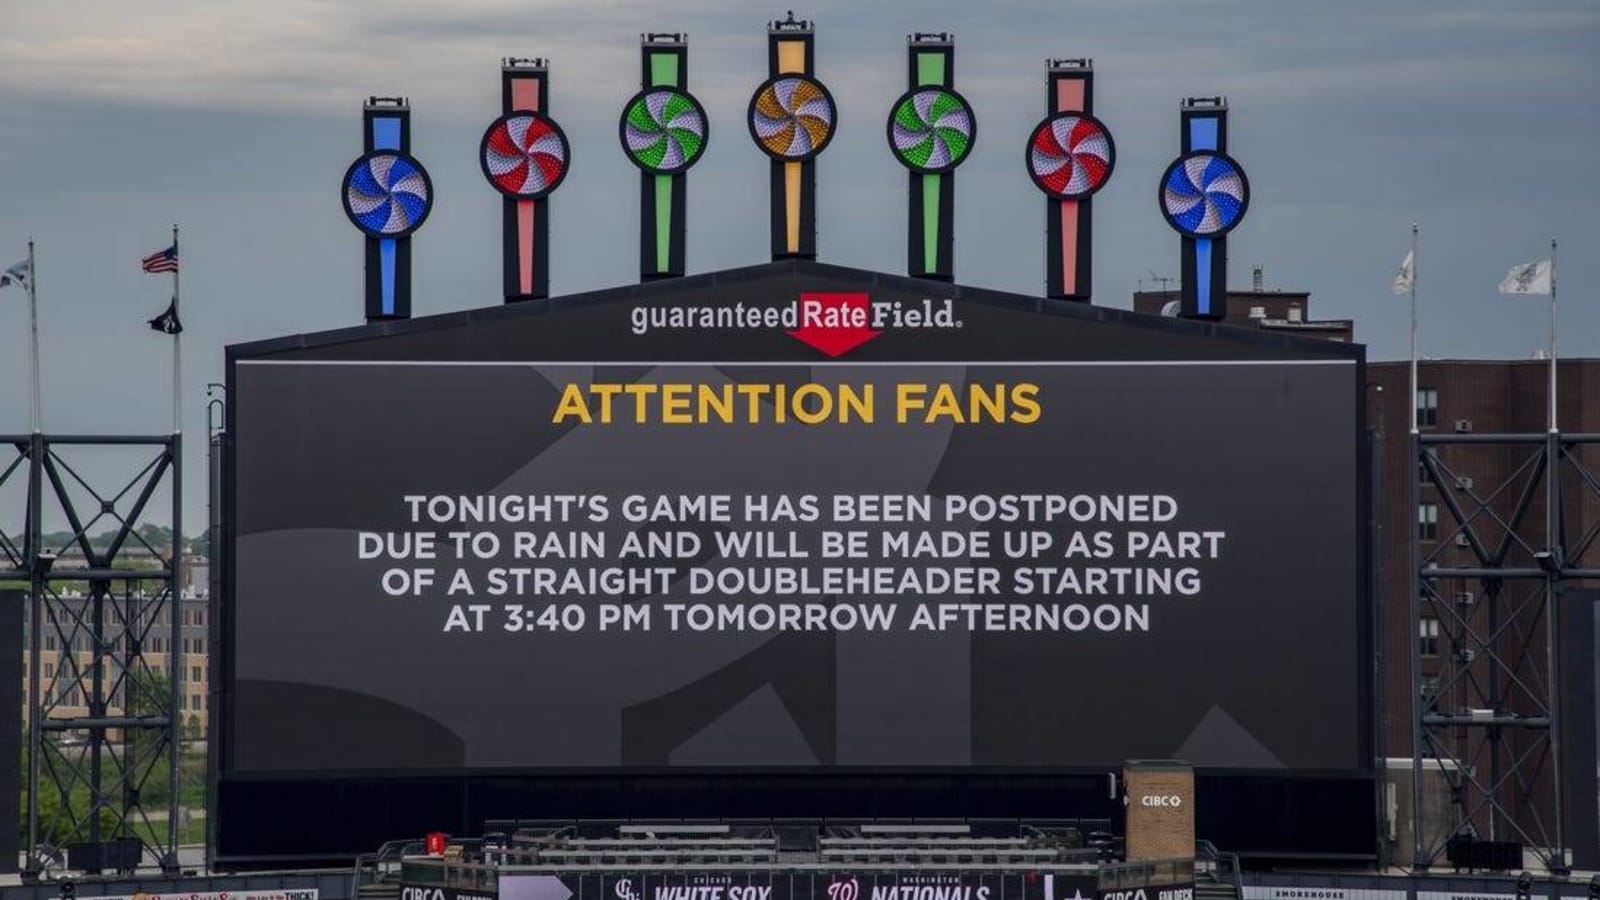 Nationals-White Sox opener postponed; doubleheader Tuesday